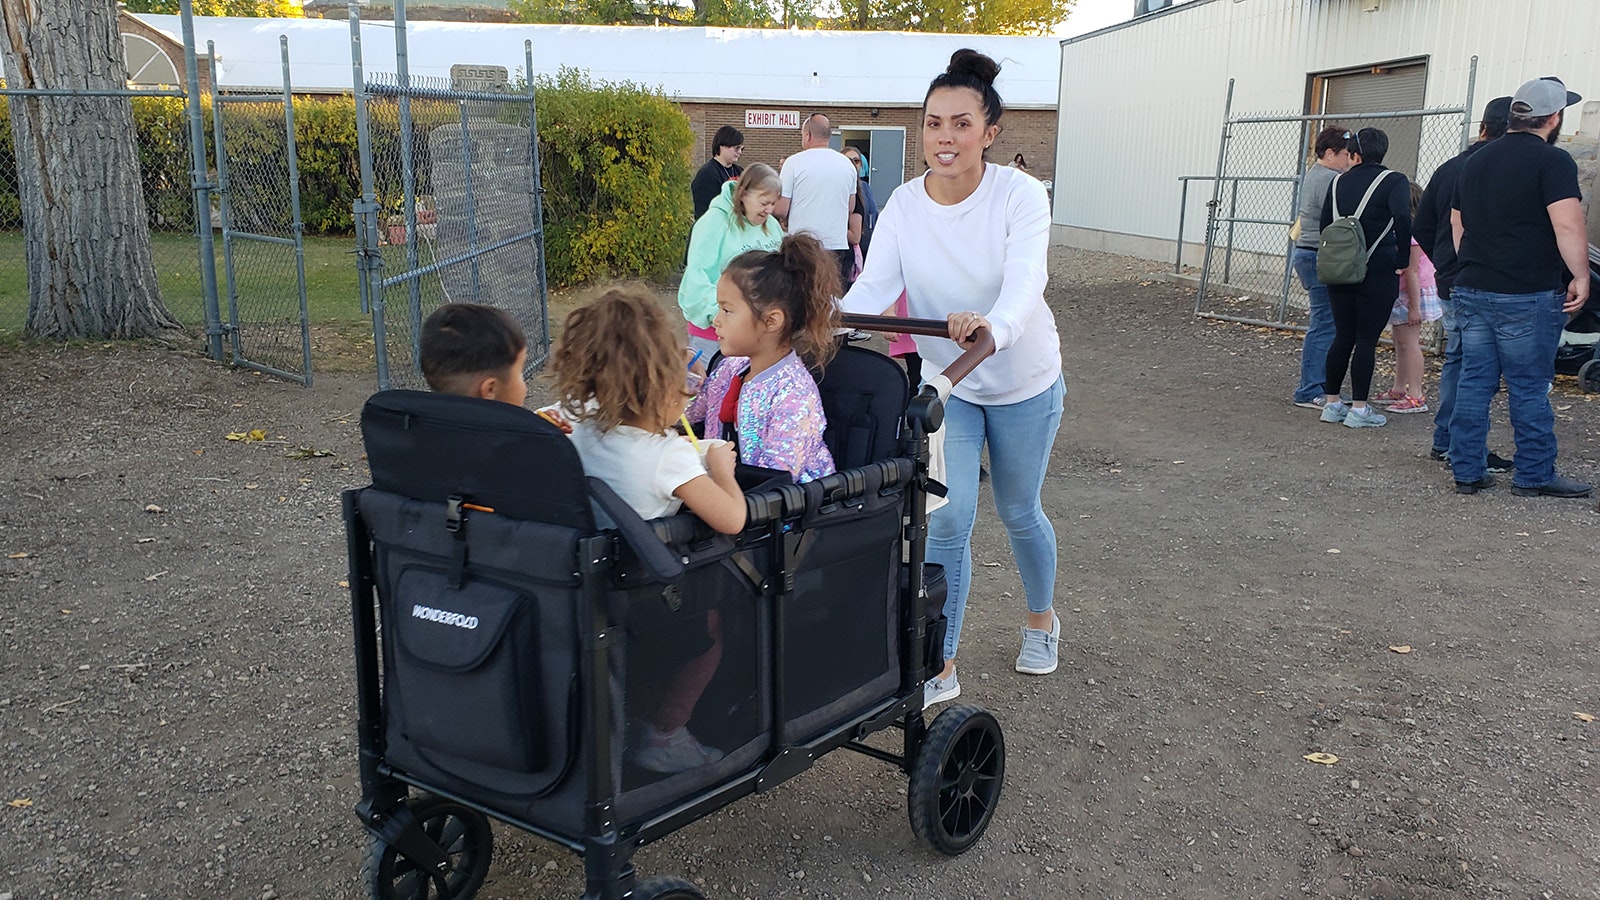 Natasha Martinez pushes a cart full of children at the recent Taste of Wyoming Food Truck Festival and Vendor Showcase. The kids all got drinks from Ohana Sips.